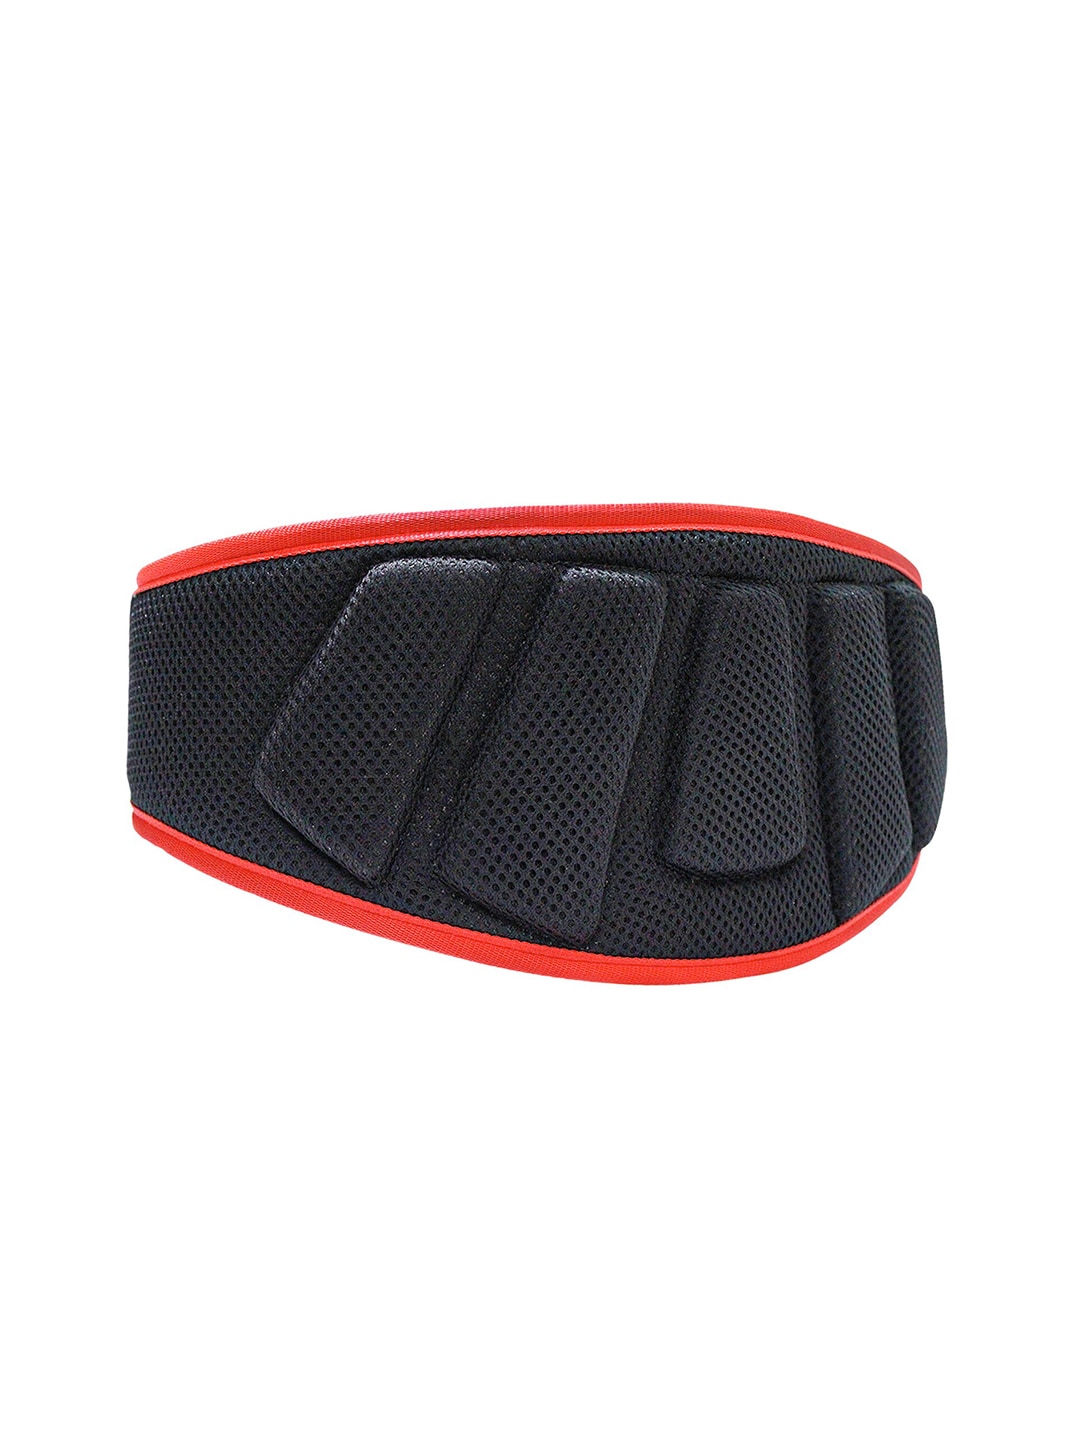 MUSCLEXP Black Gym Nylon Padded Weightlifting Belt Sport Accessories Price in India